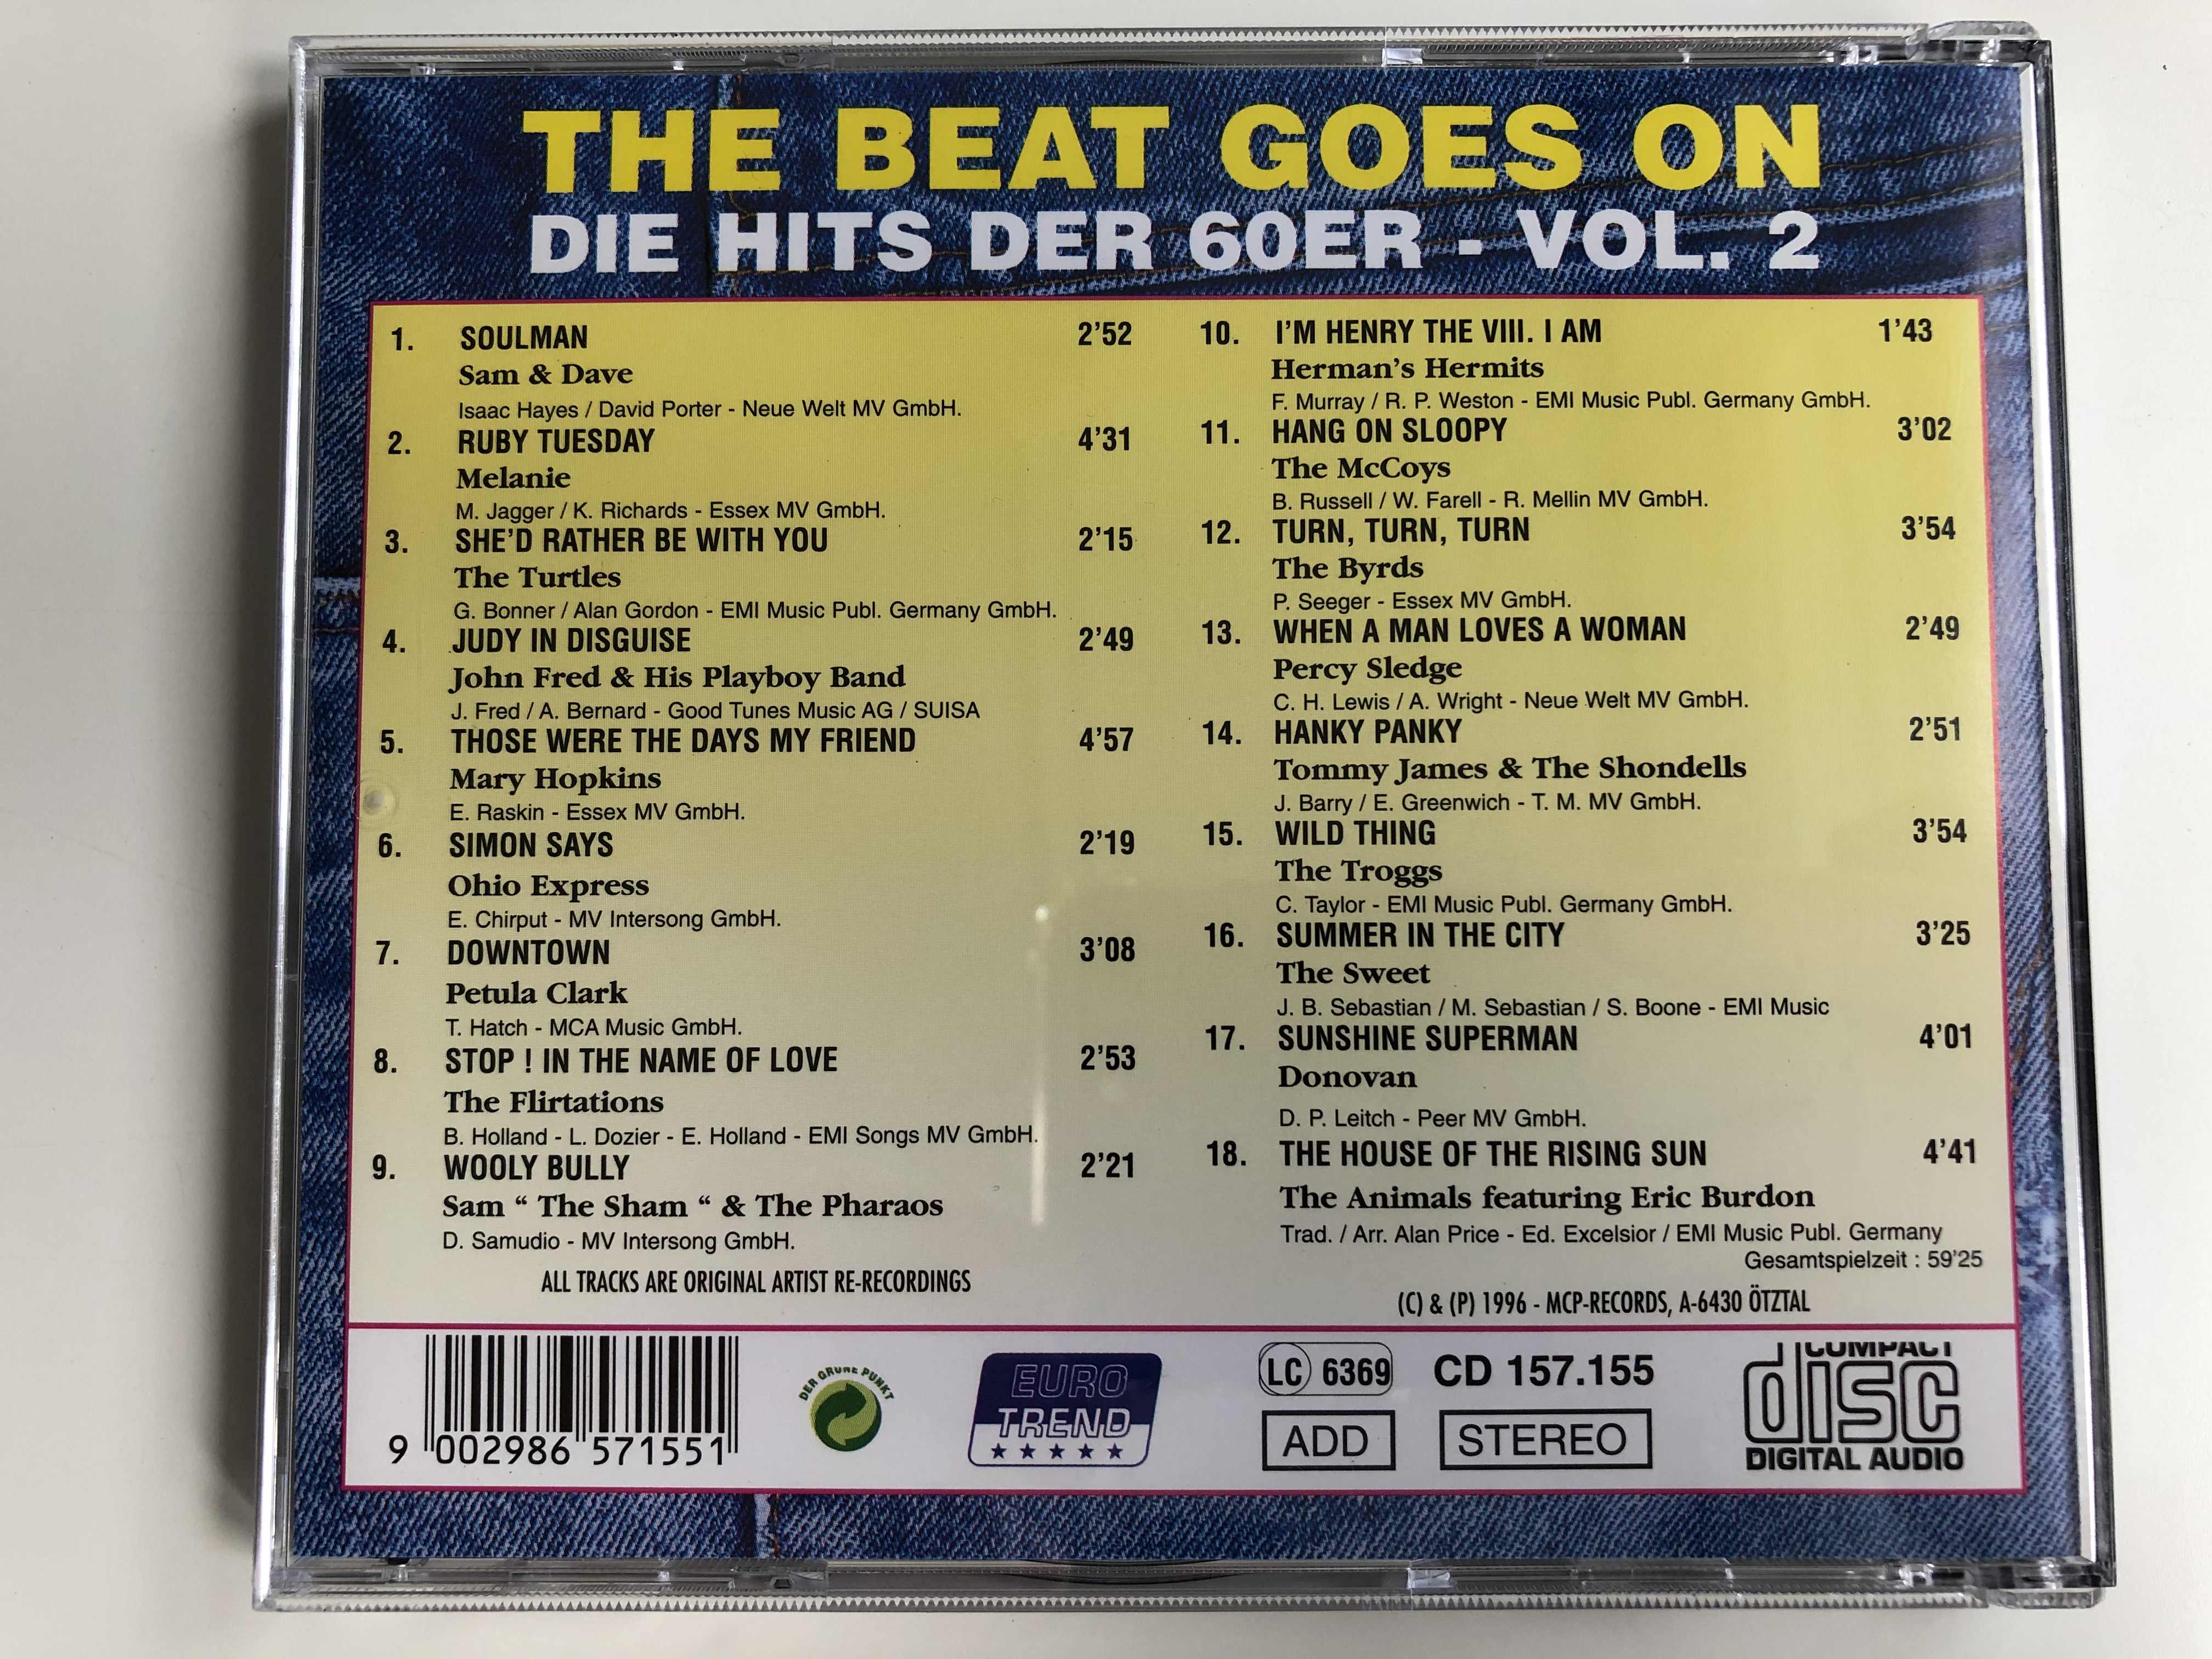 the-beat-goes-on-die-hits-der-60er-vol.-2-soulman-sam-dave-ruby-tuesday-melanie-stop-in-the-name-of-love-the-flirtations-downtown-petula-clark-wooly-bully-sam-the-sham-3-.jpg